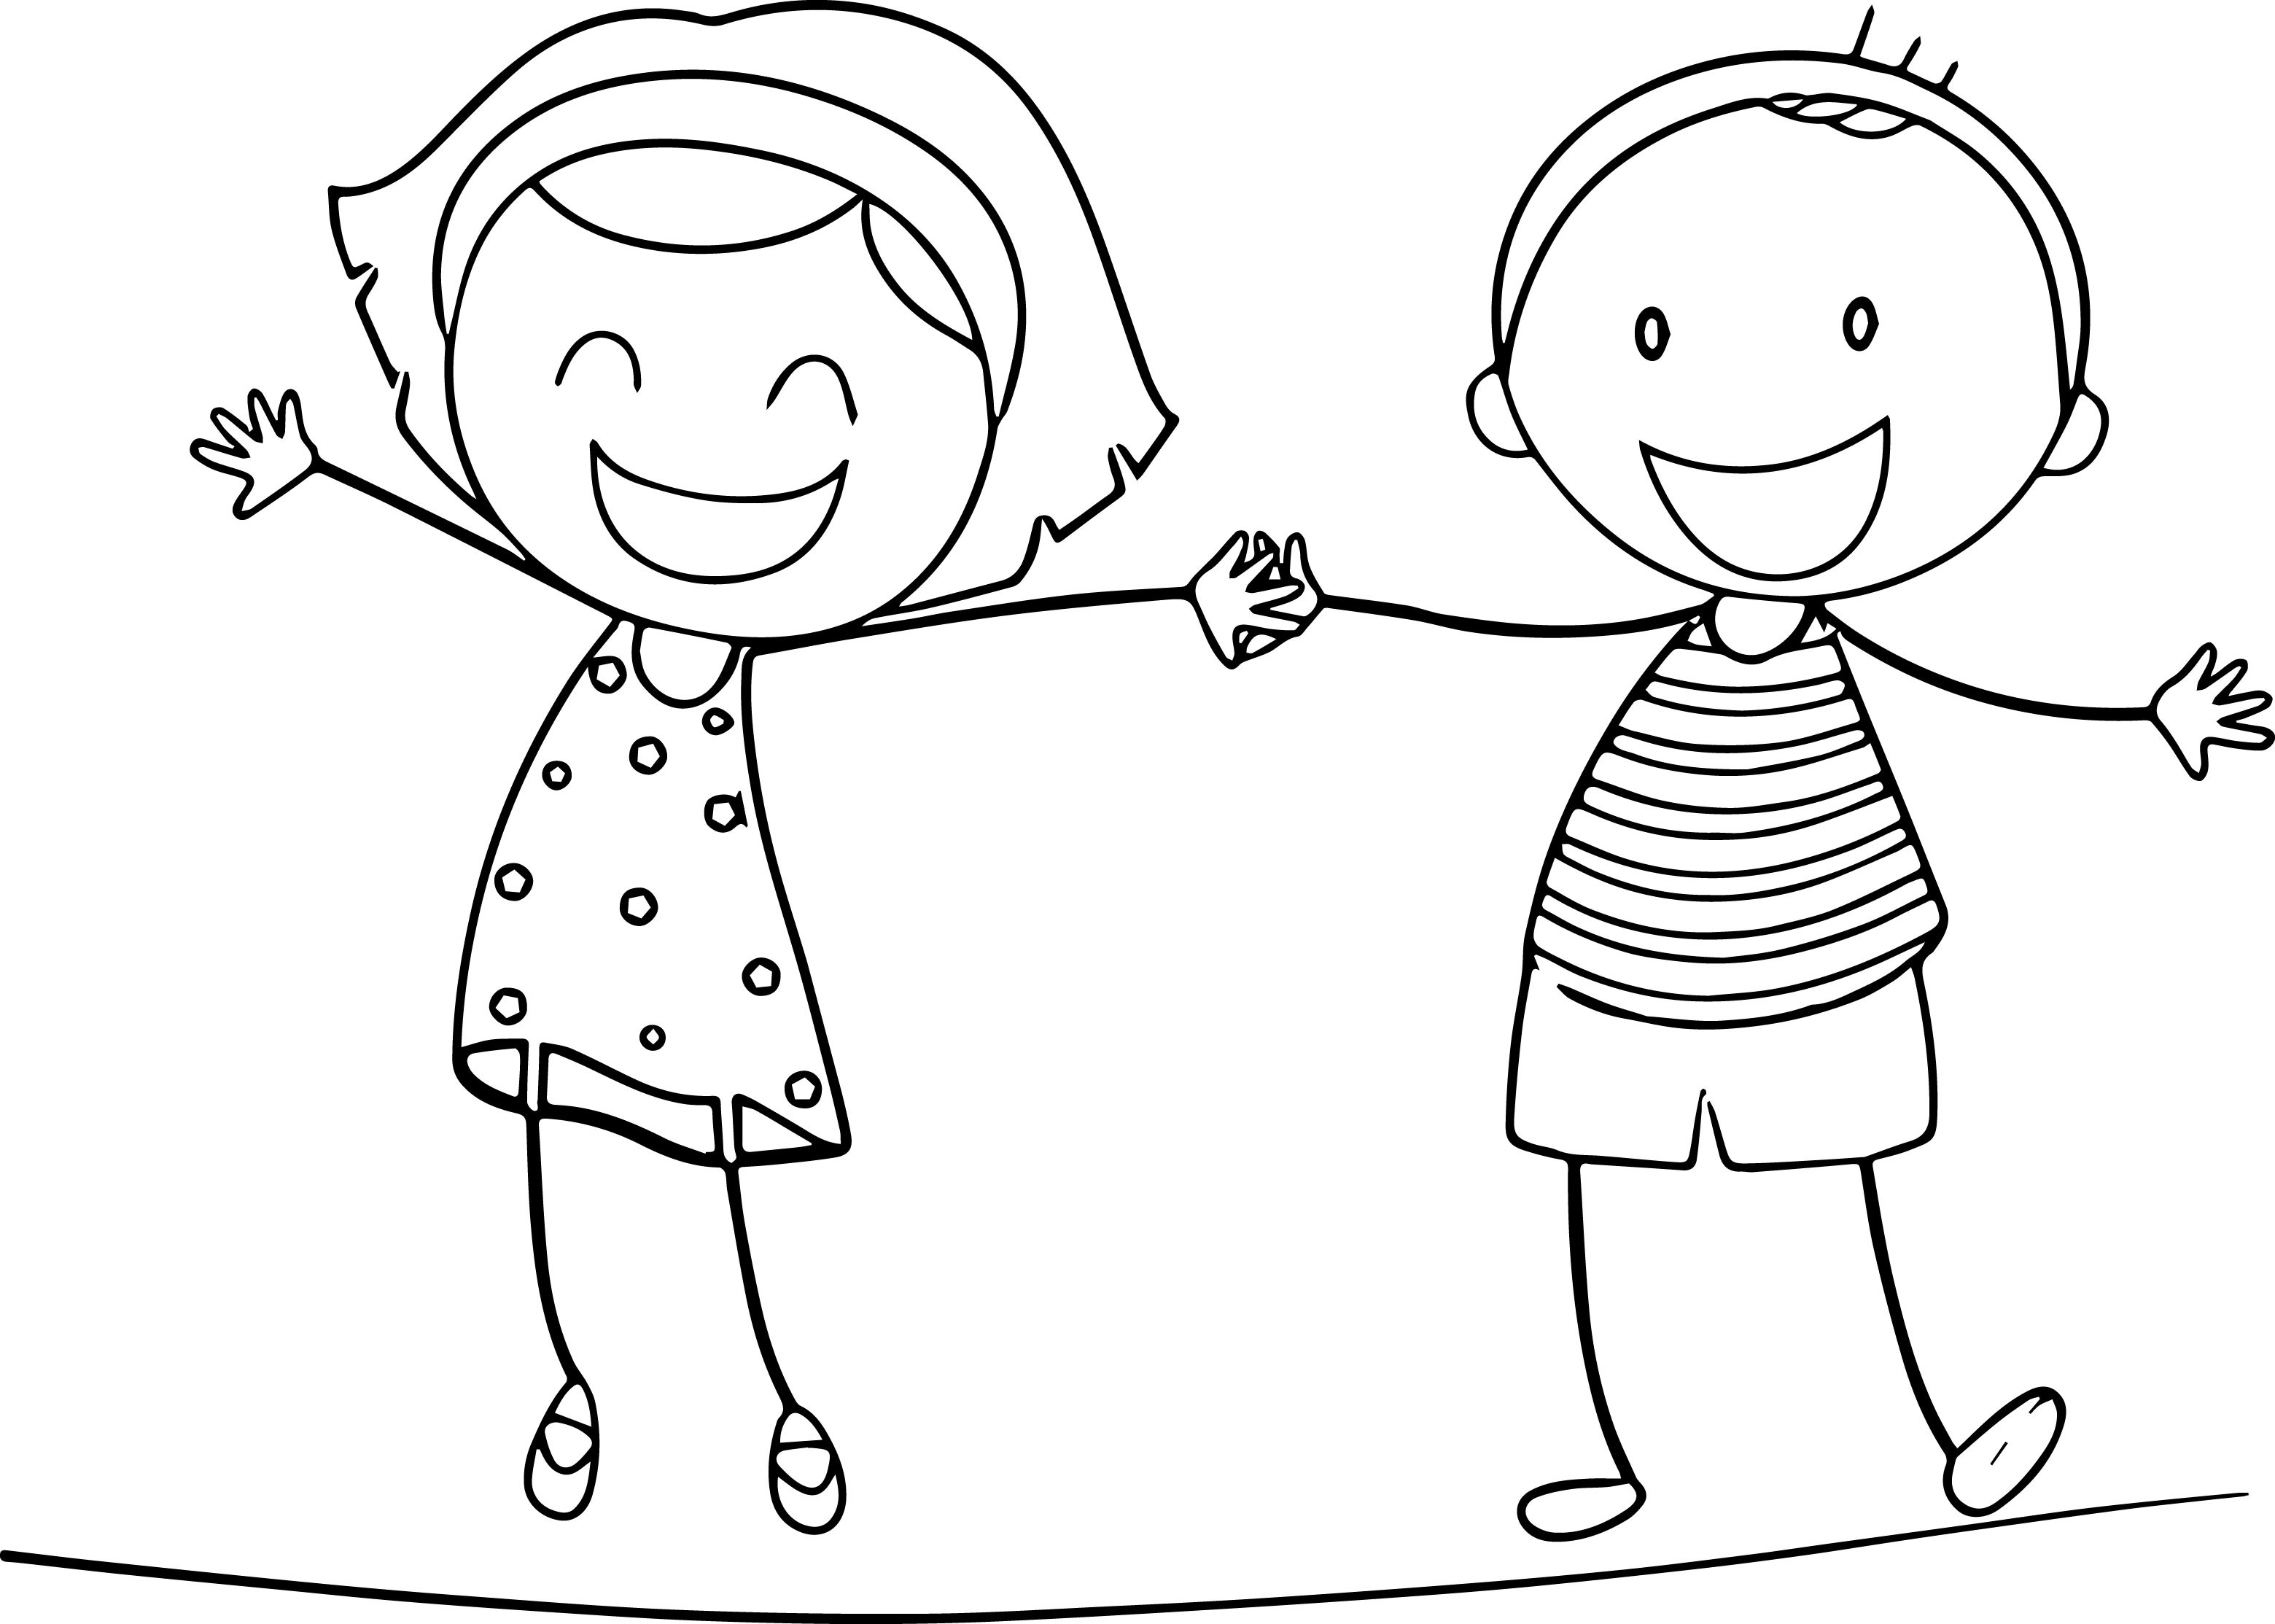 Coloring Sheets For Boys And Girls
 Fun Coloring Pages For Boys And Girls The Art Jinni